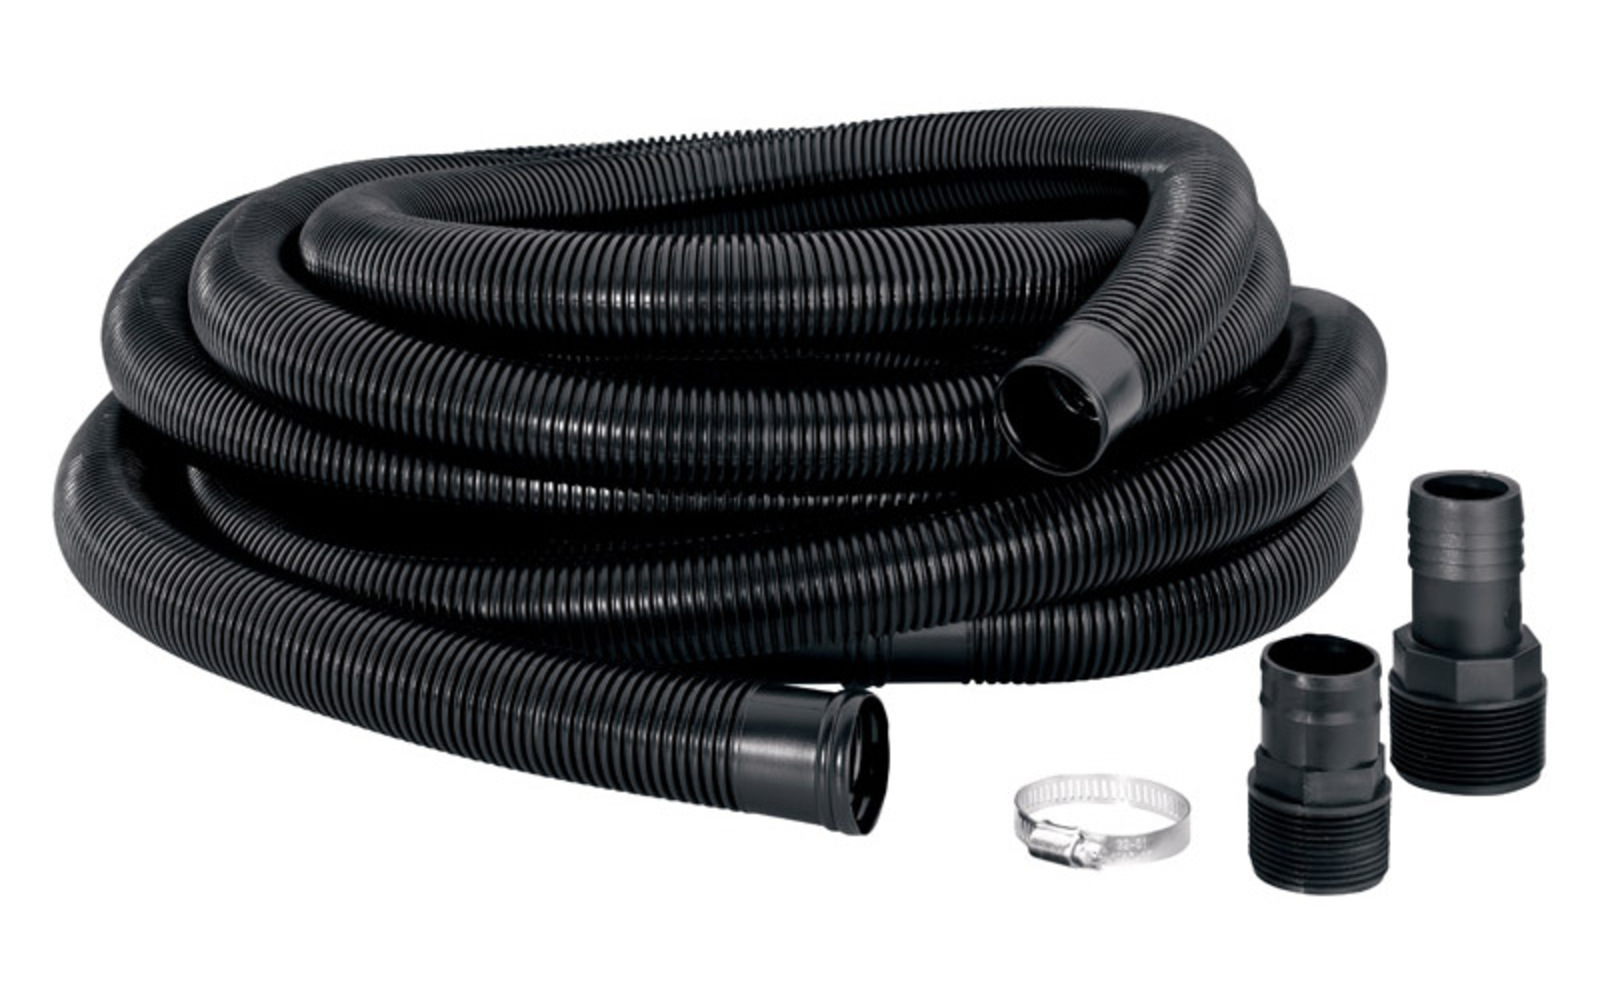 Parts 2O Silicone Radiator Discharge Sump Pump Hose Kit - image 2 of 2